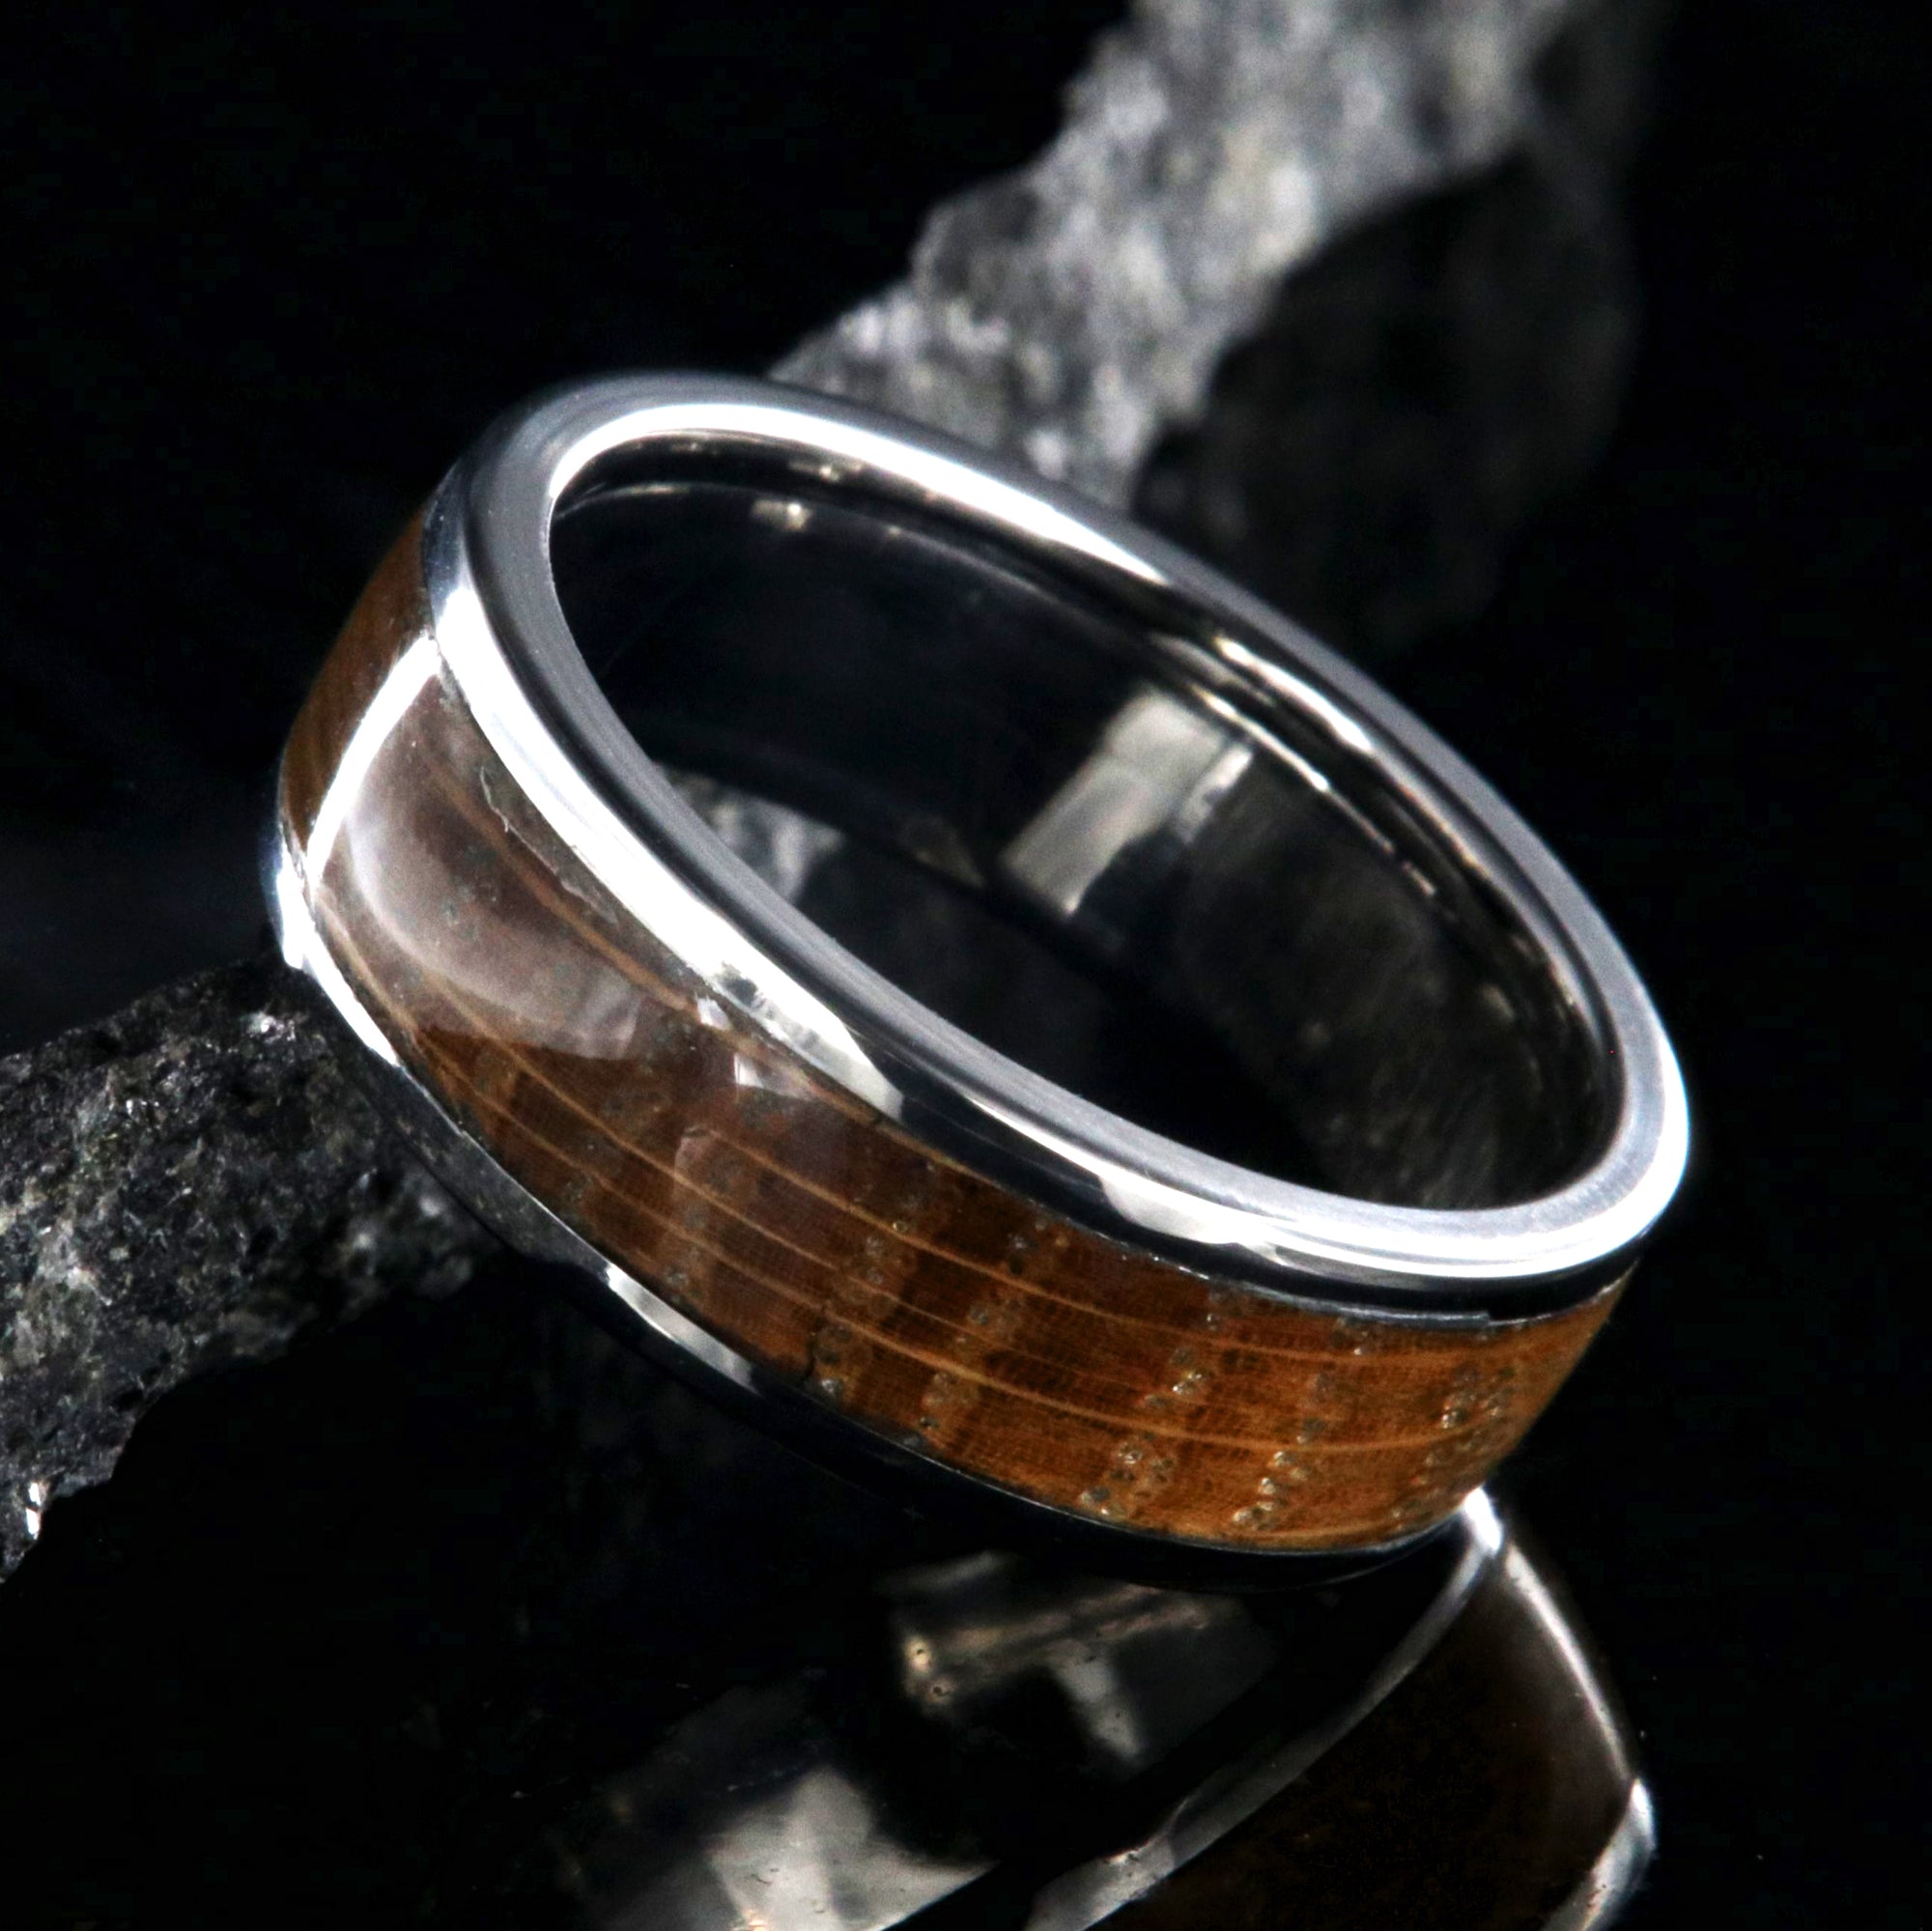 7mm wide wedding band with titanium edges and a whiskey barrel sleeve